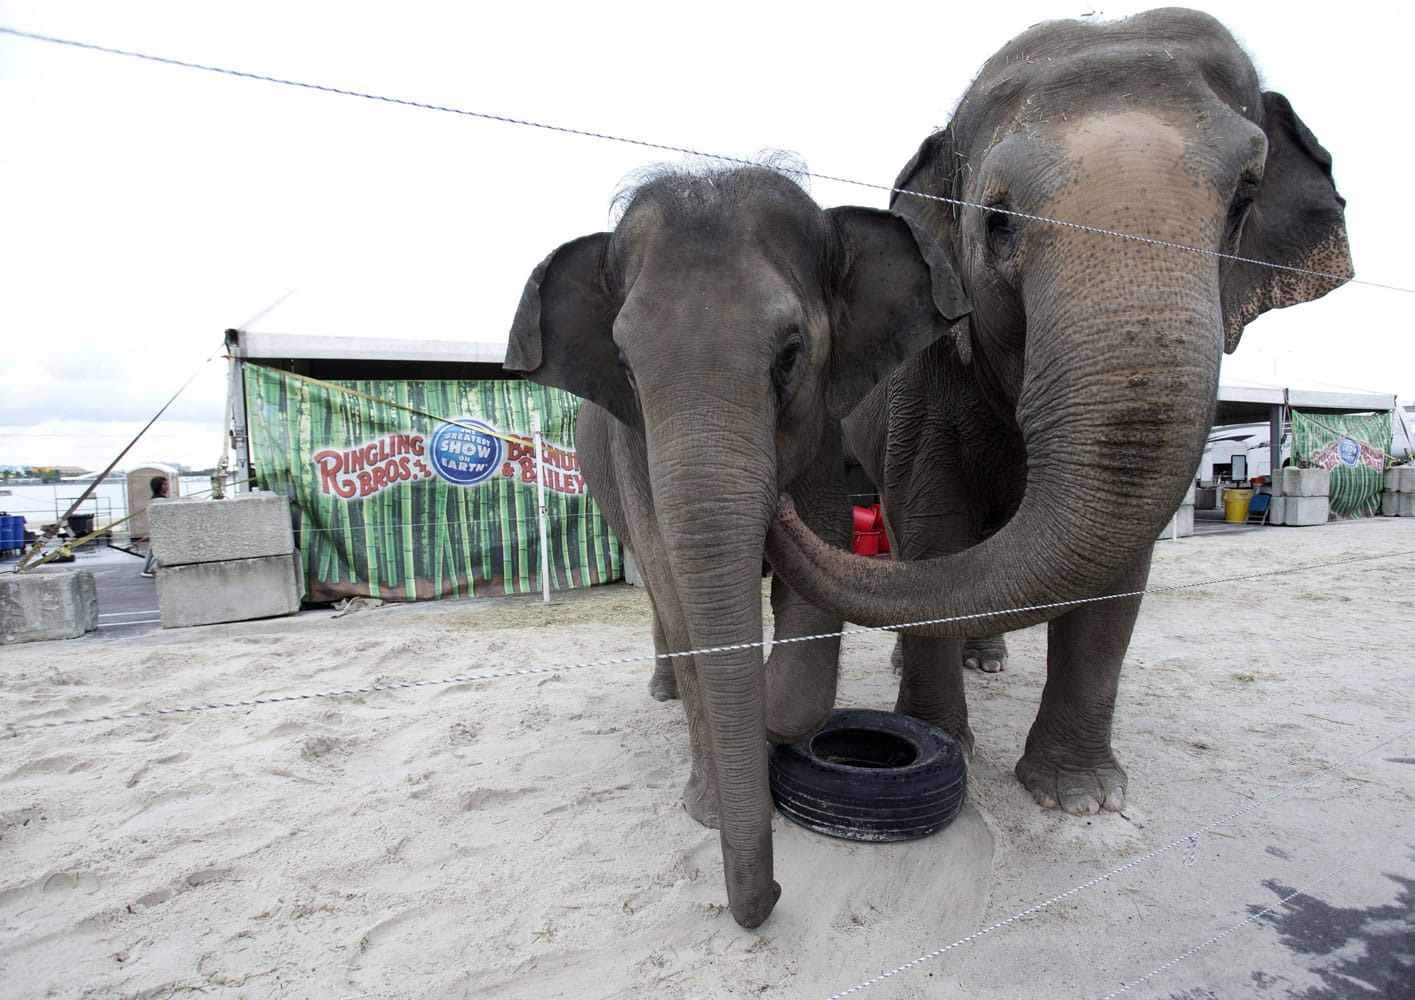 Asian elephants named April, left, and Luna, belonging to Ringling Bros. and Barnum &amp; Bailey Circus, interact Friday in their enclosure outside the American Airlines Arena in Miami.